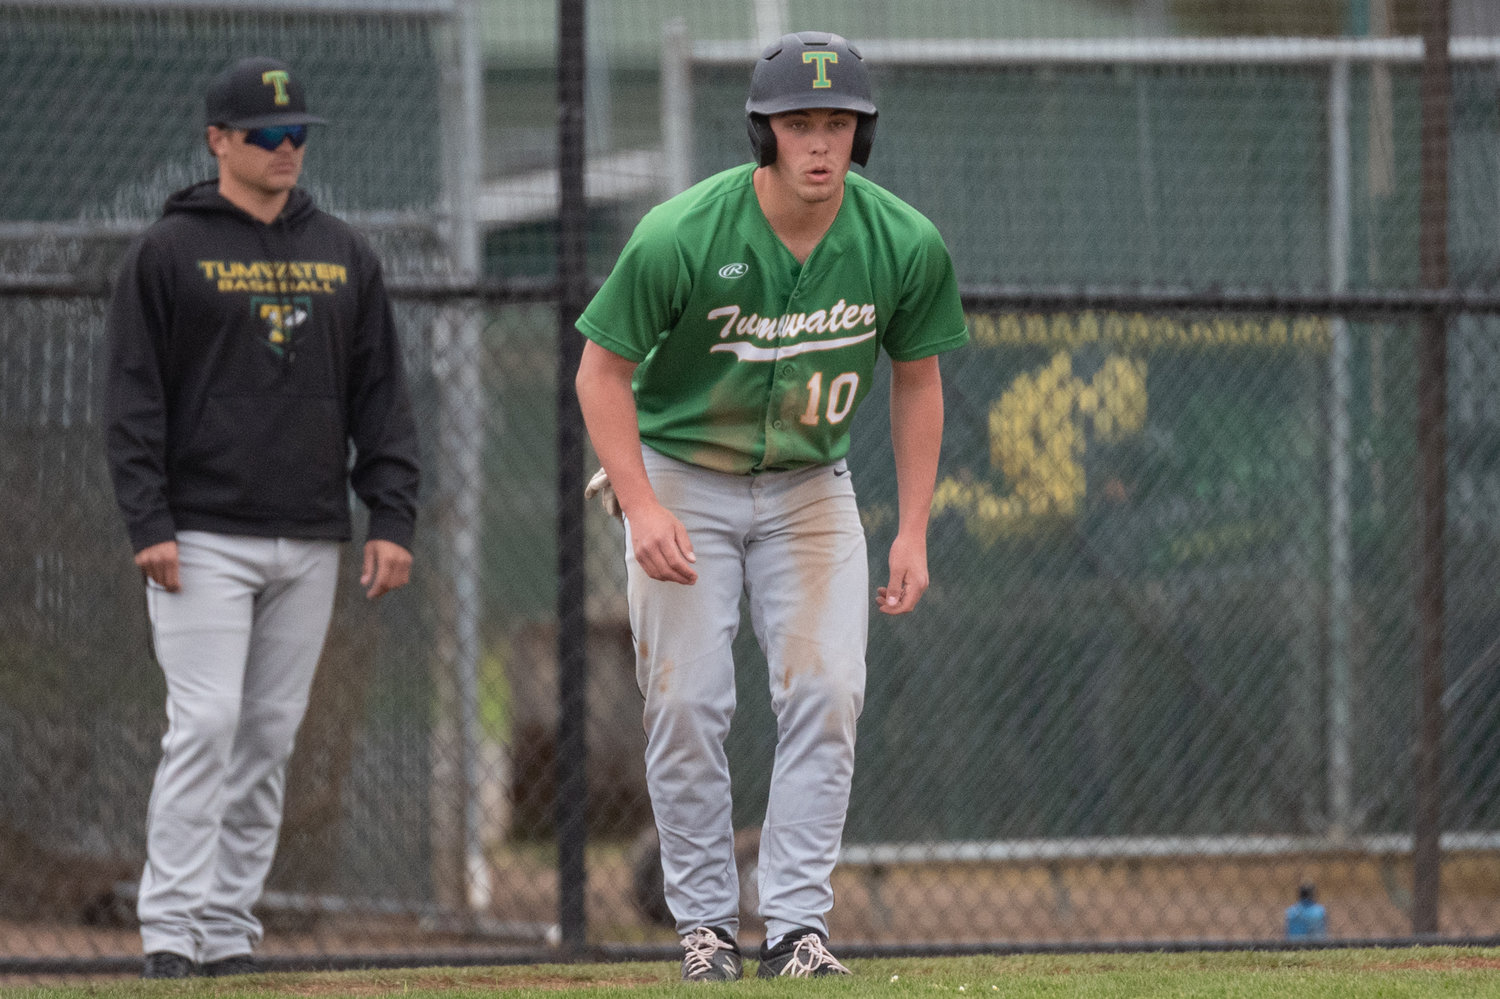 Tumwater's Ryan Orr navigates third base while coach Lyle Overbay looks on against Centralia May 2.